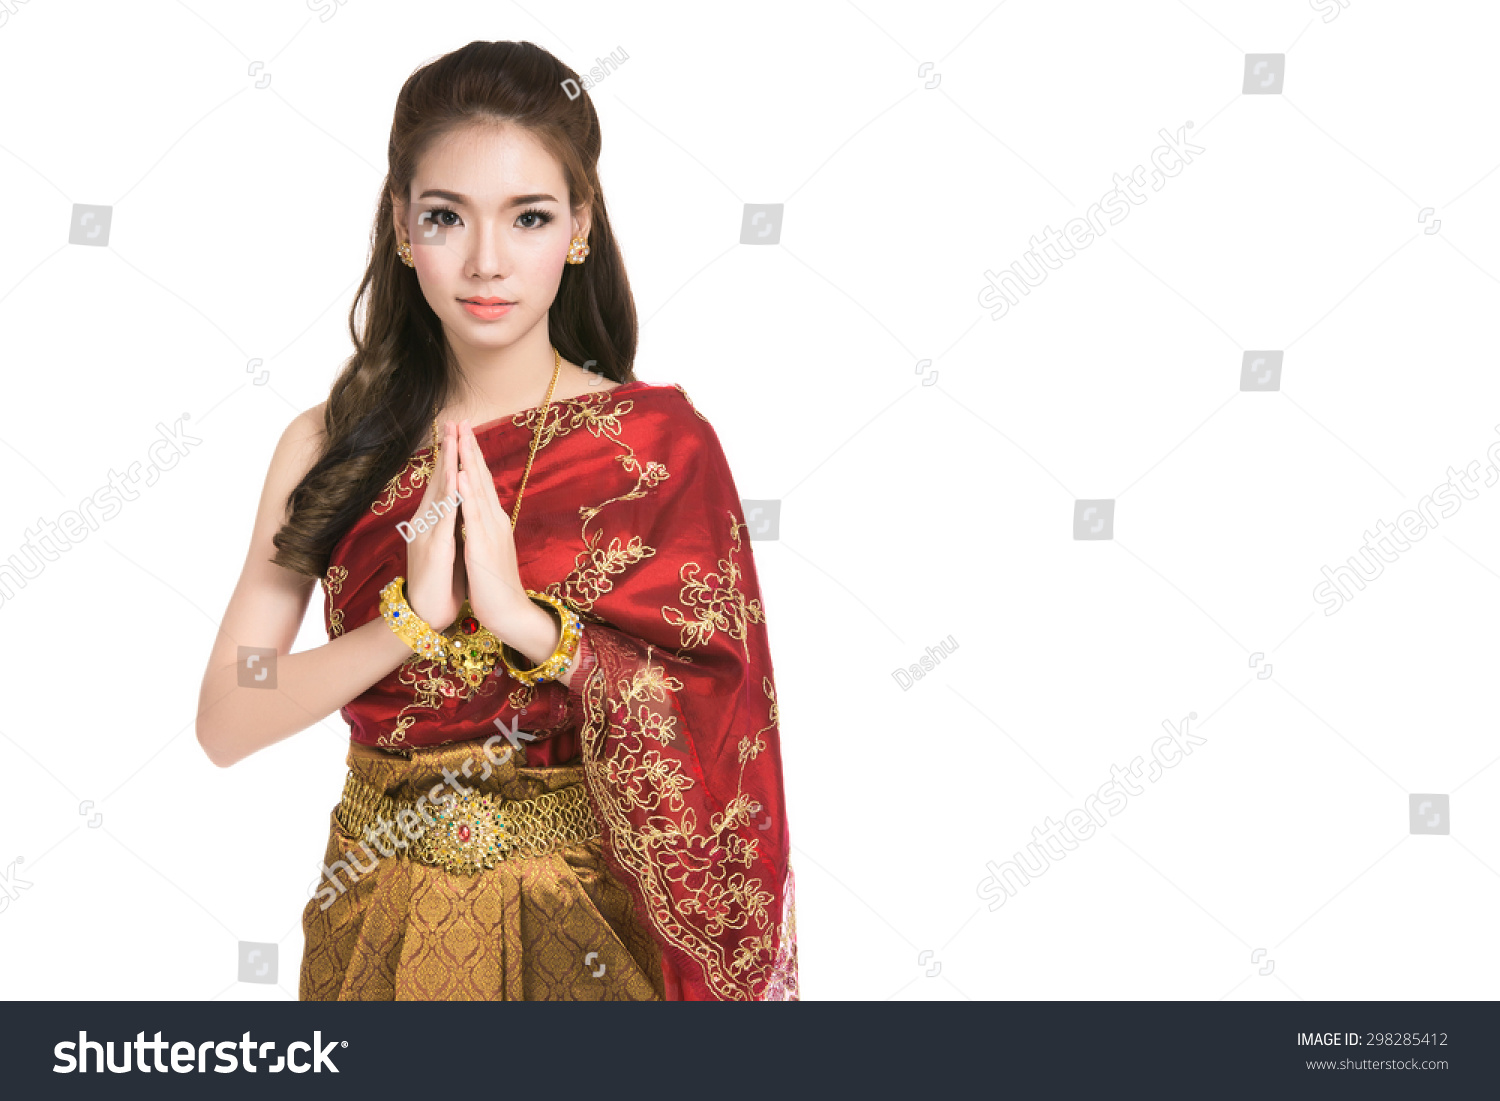 Culture And The Asian Woman 59